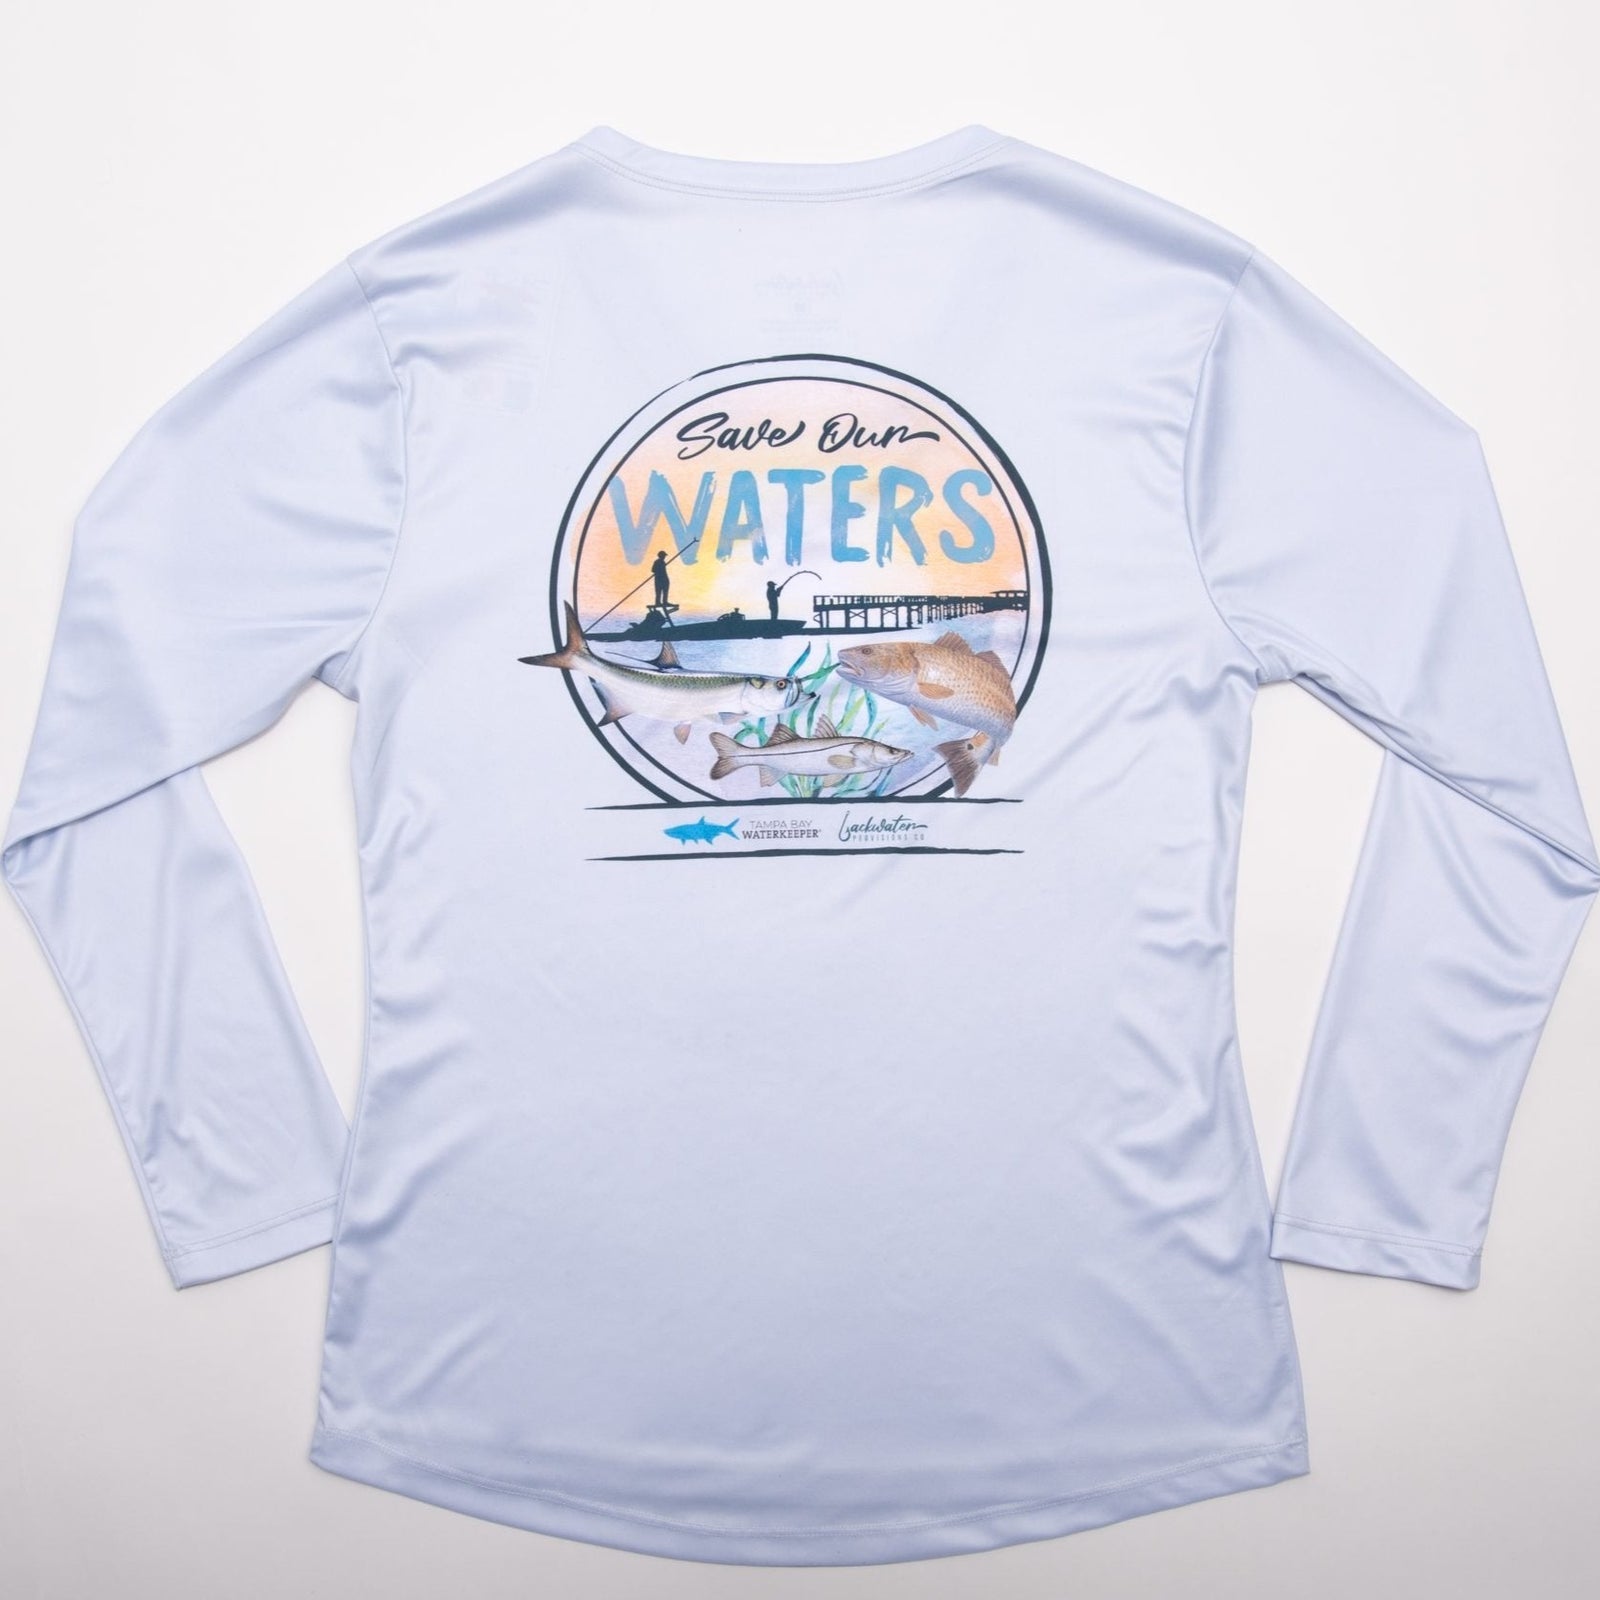 Women's Save Our Waters Performance Shirt